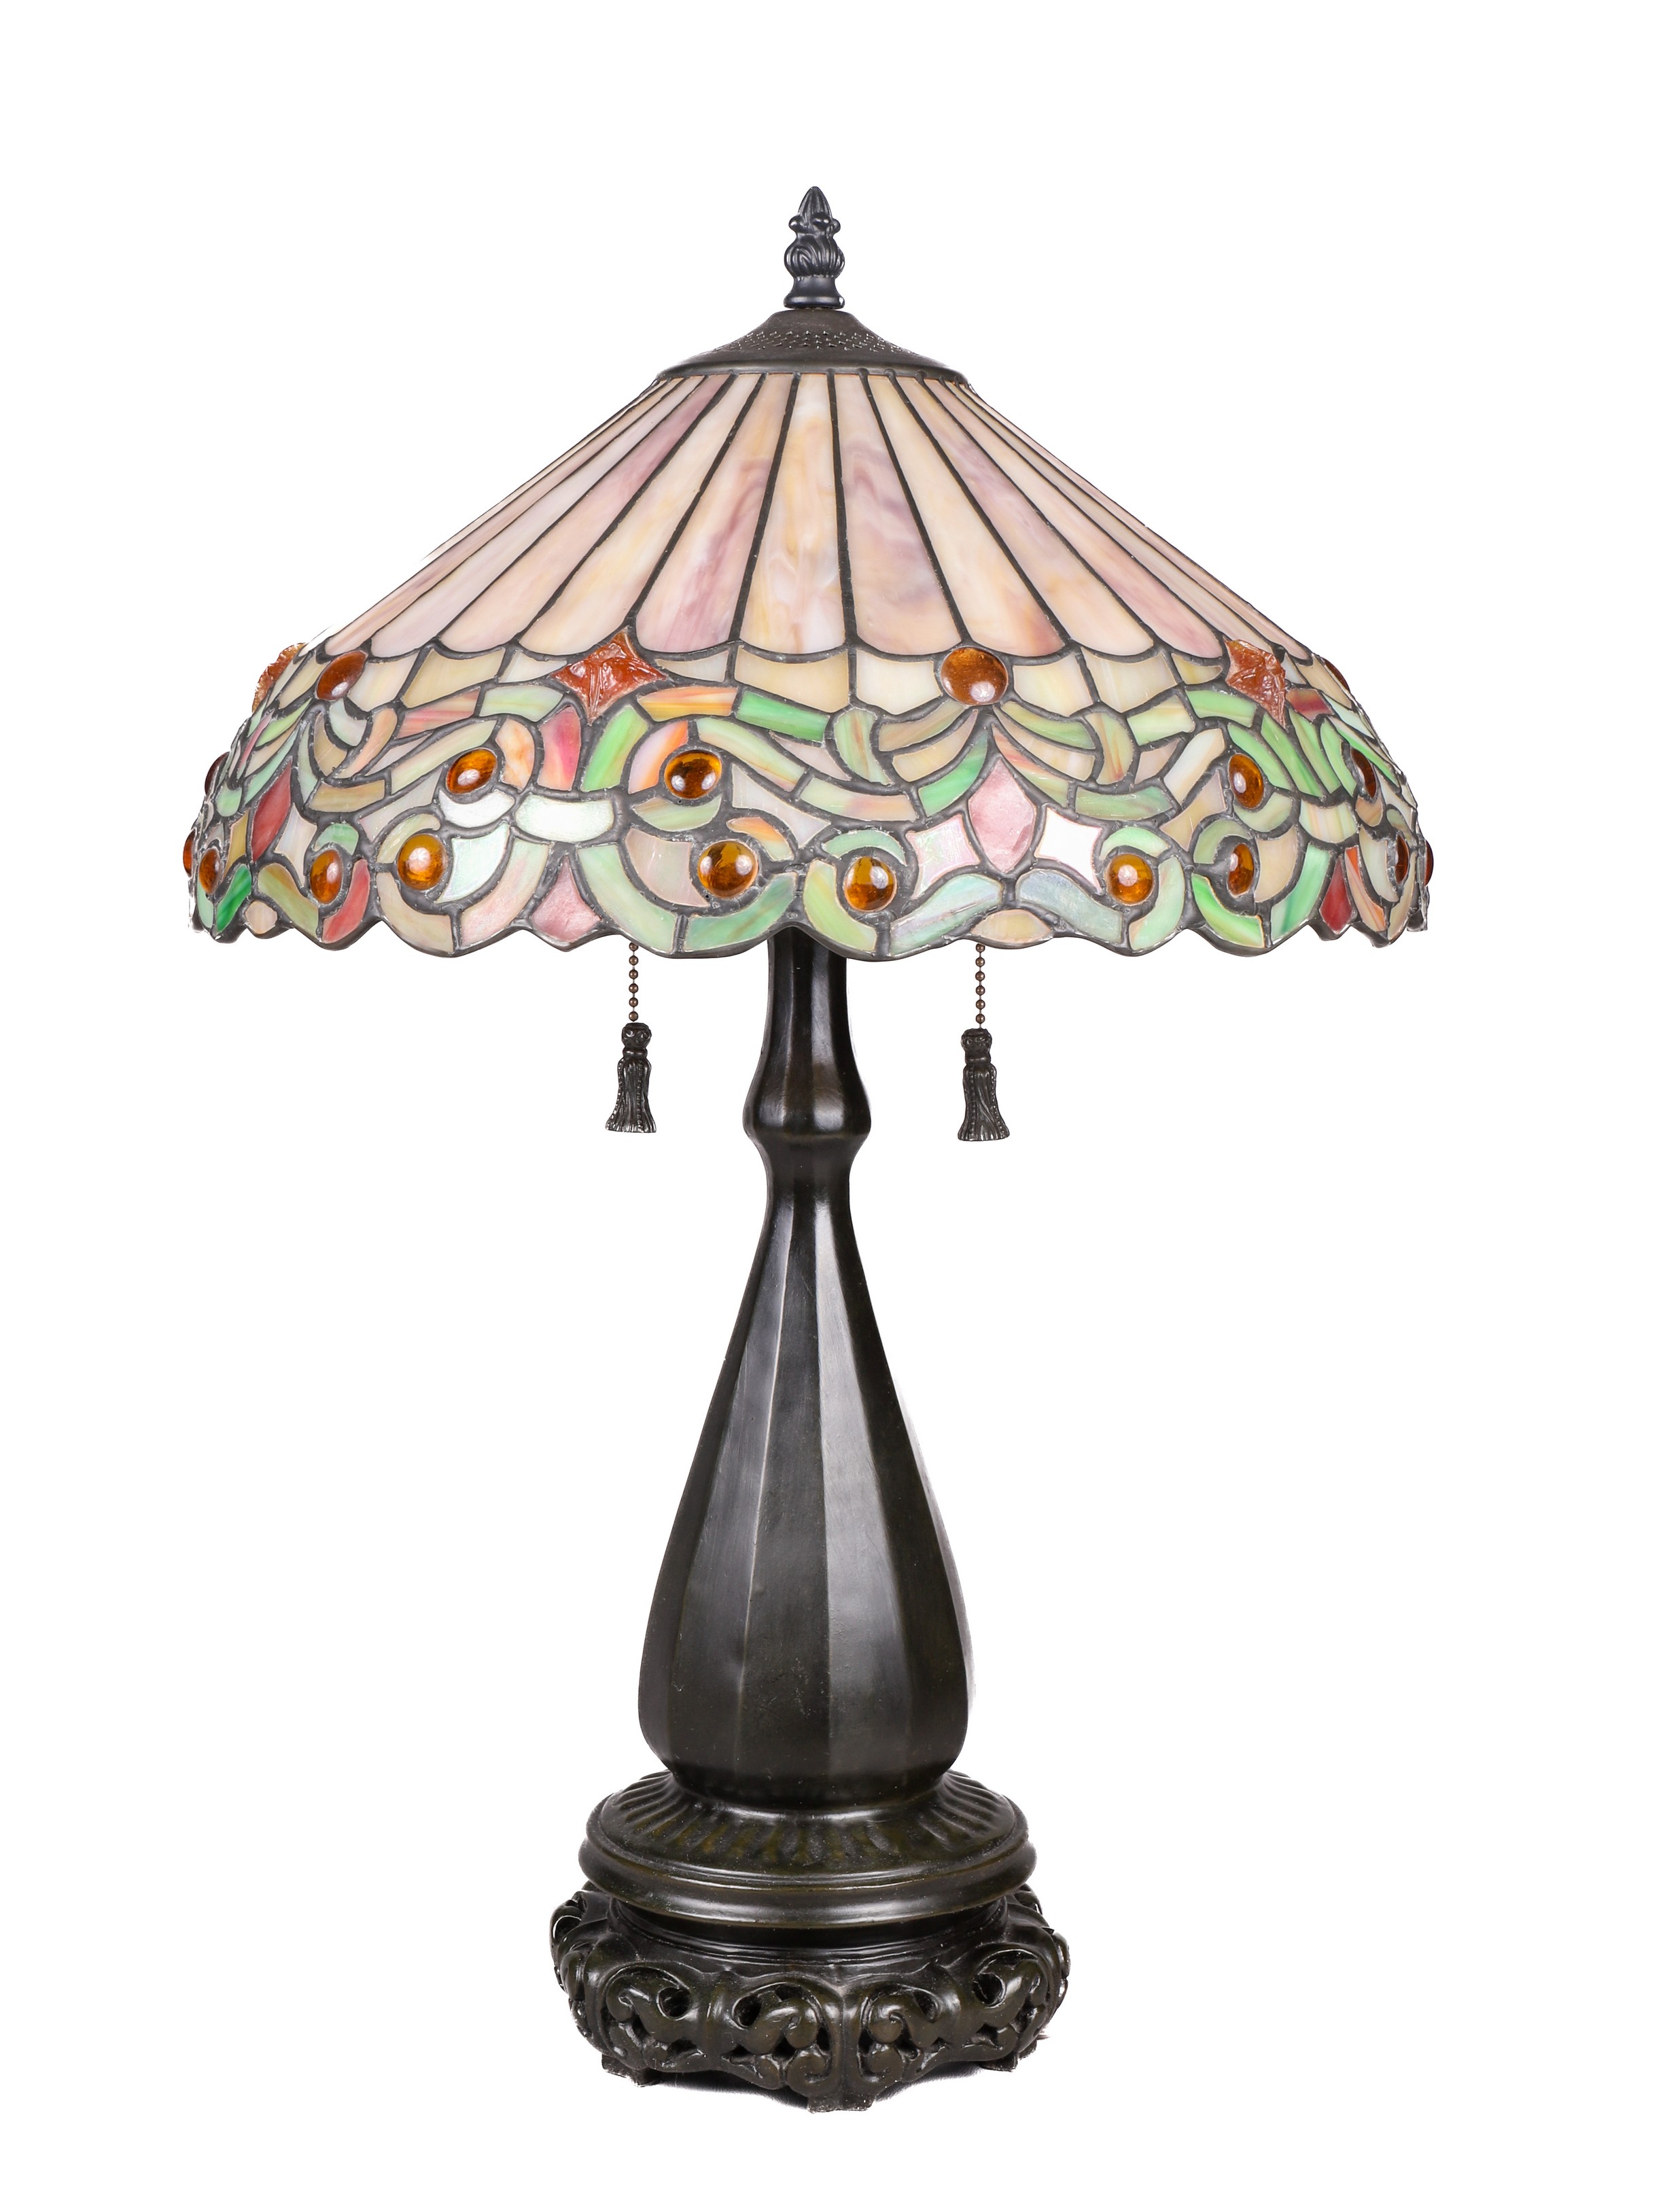 Quoizel stained glass table lamp  3b6667